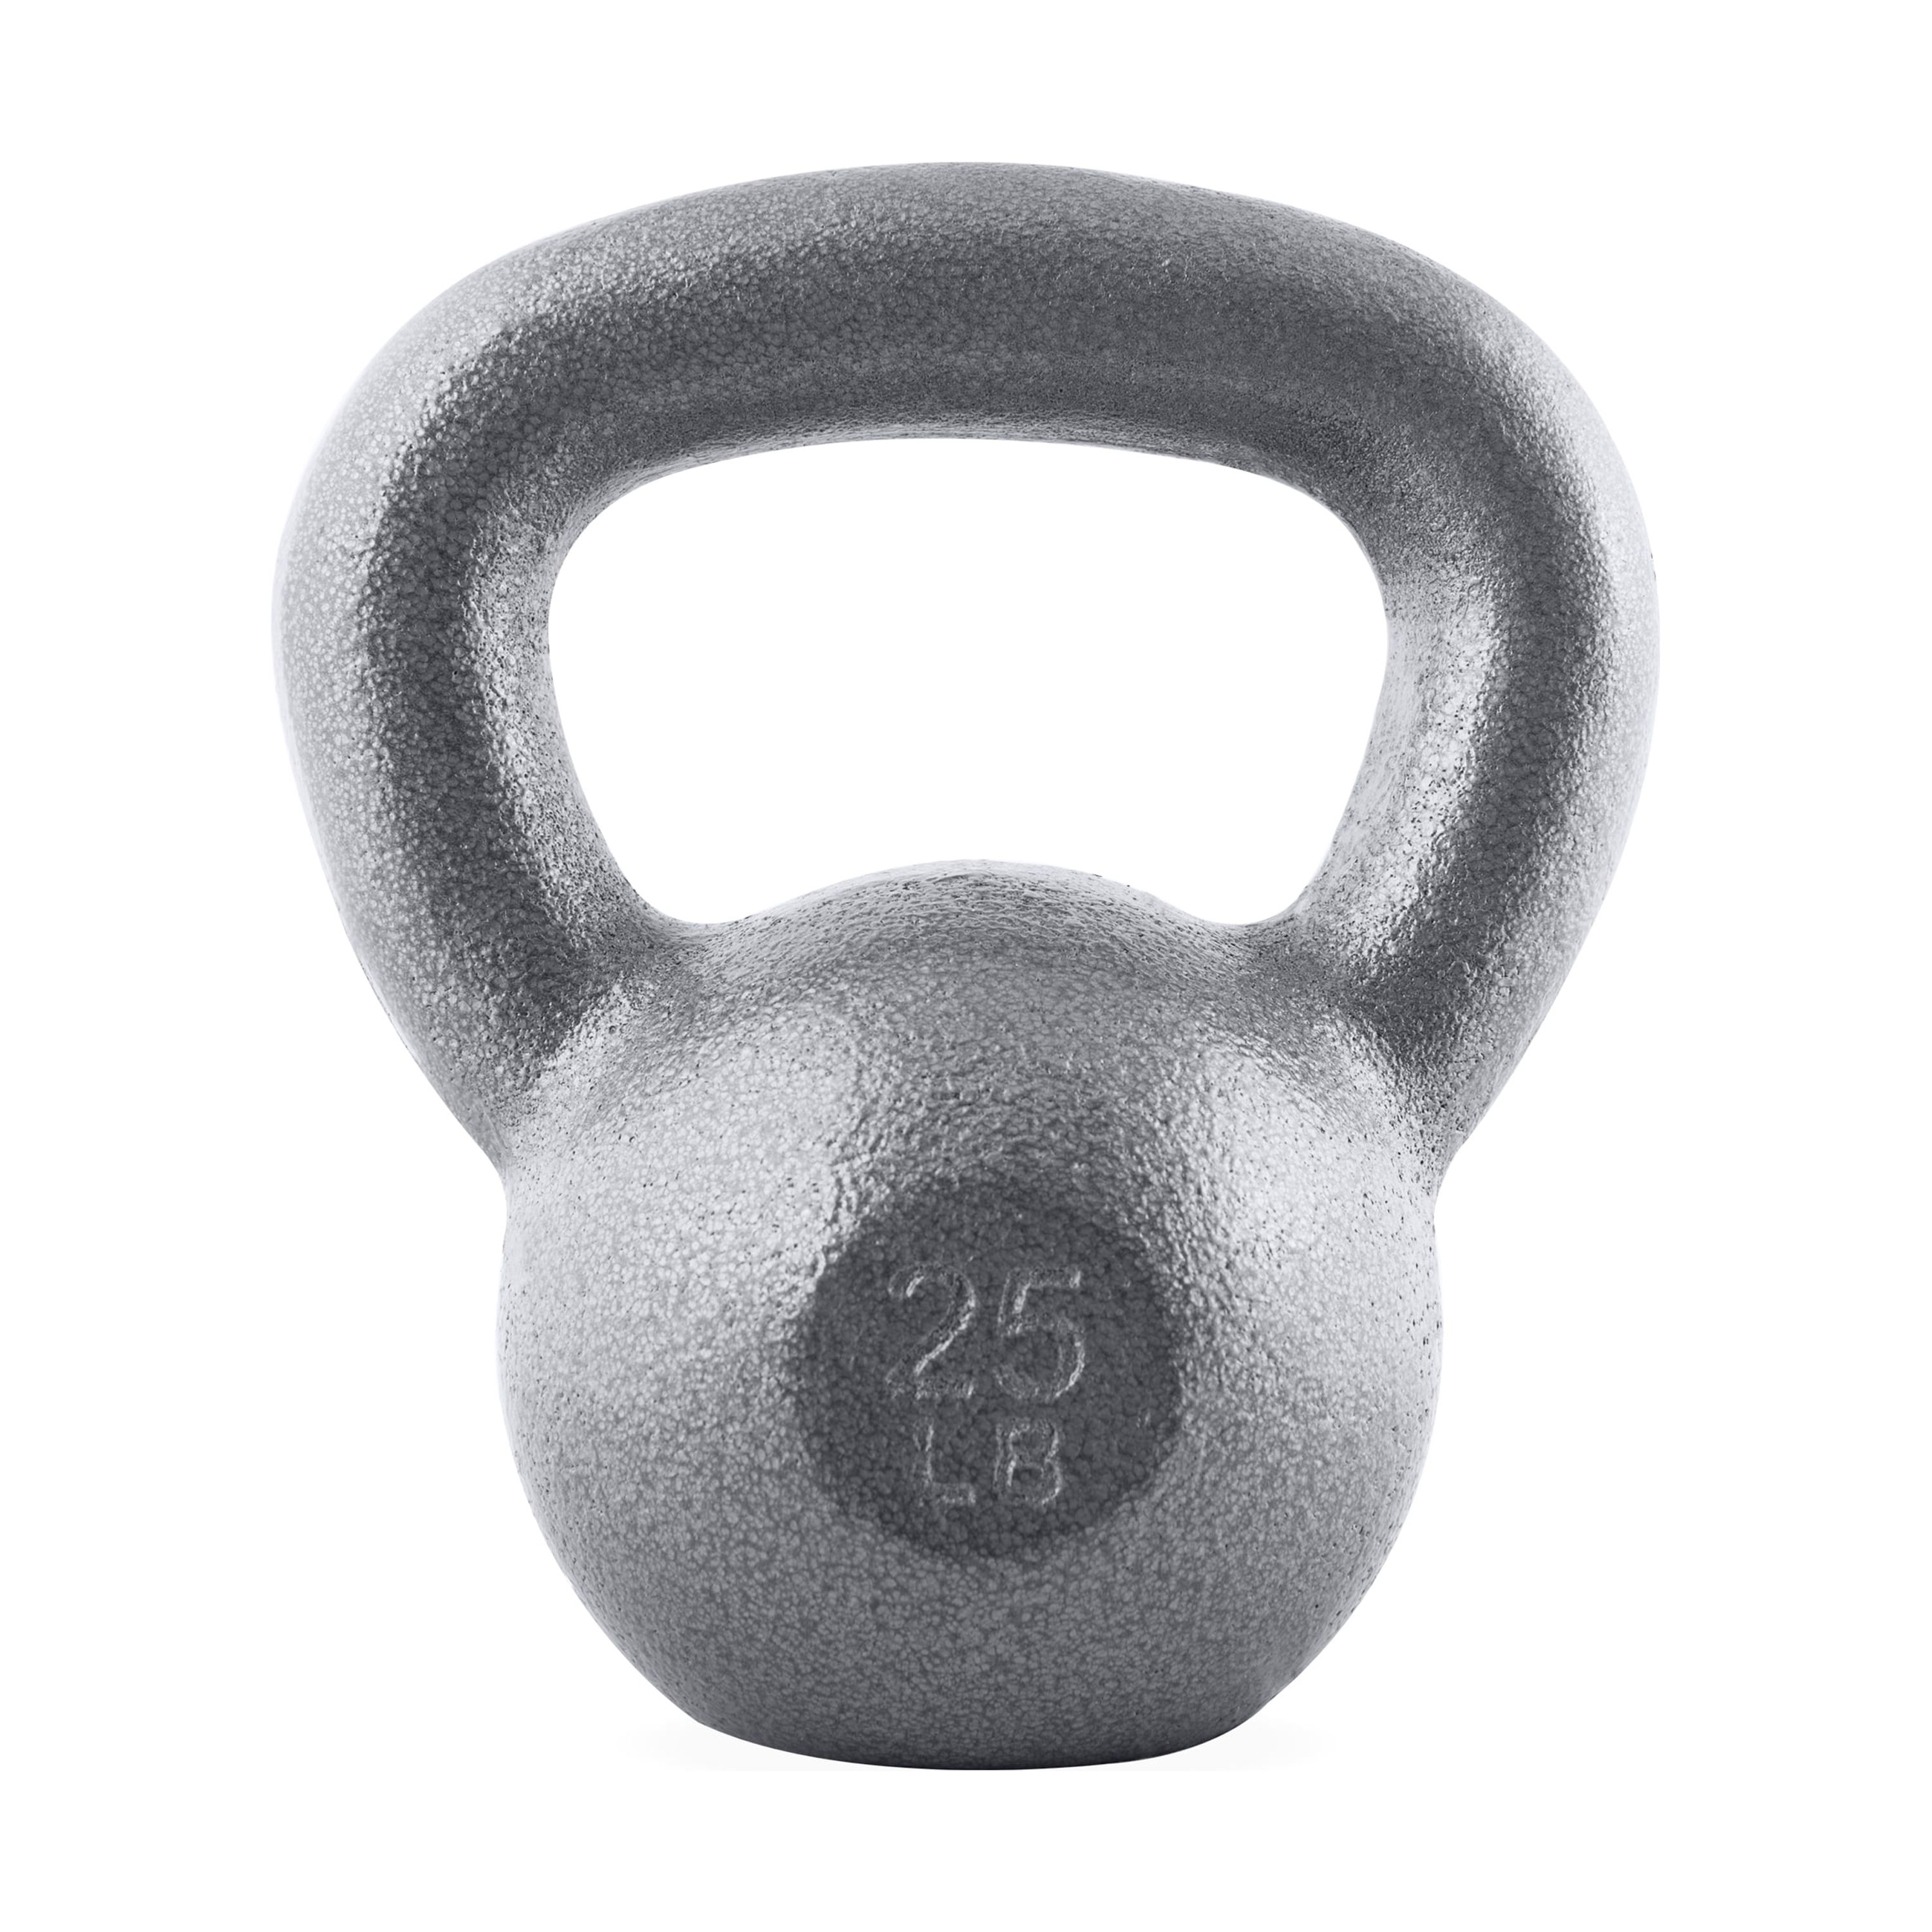 CAP Barbell Cast Iron Kettlebell, Single, 25-Pounds - image 1 of 7